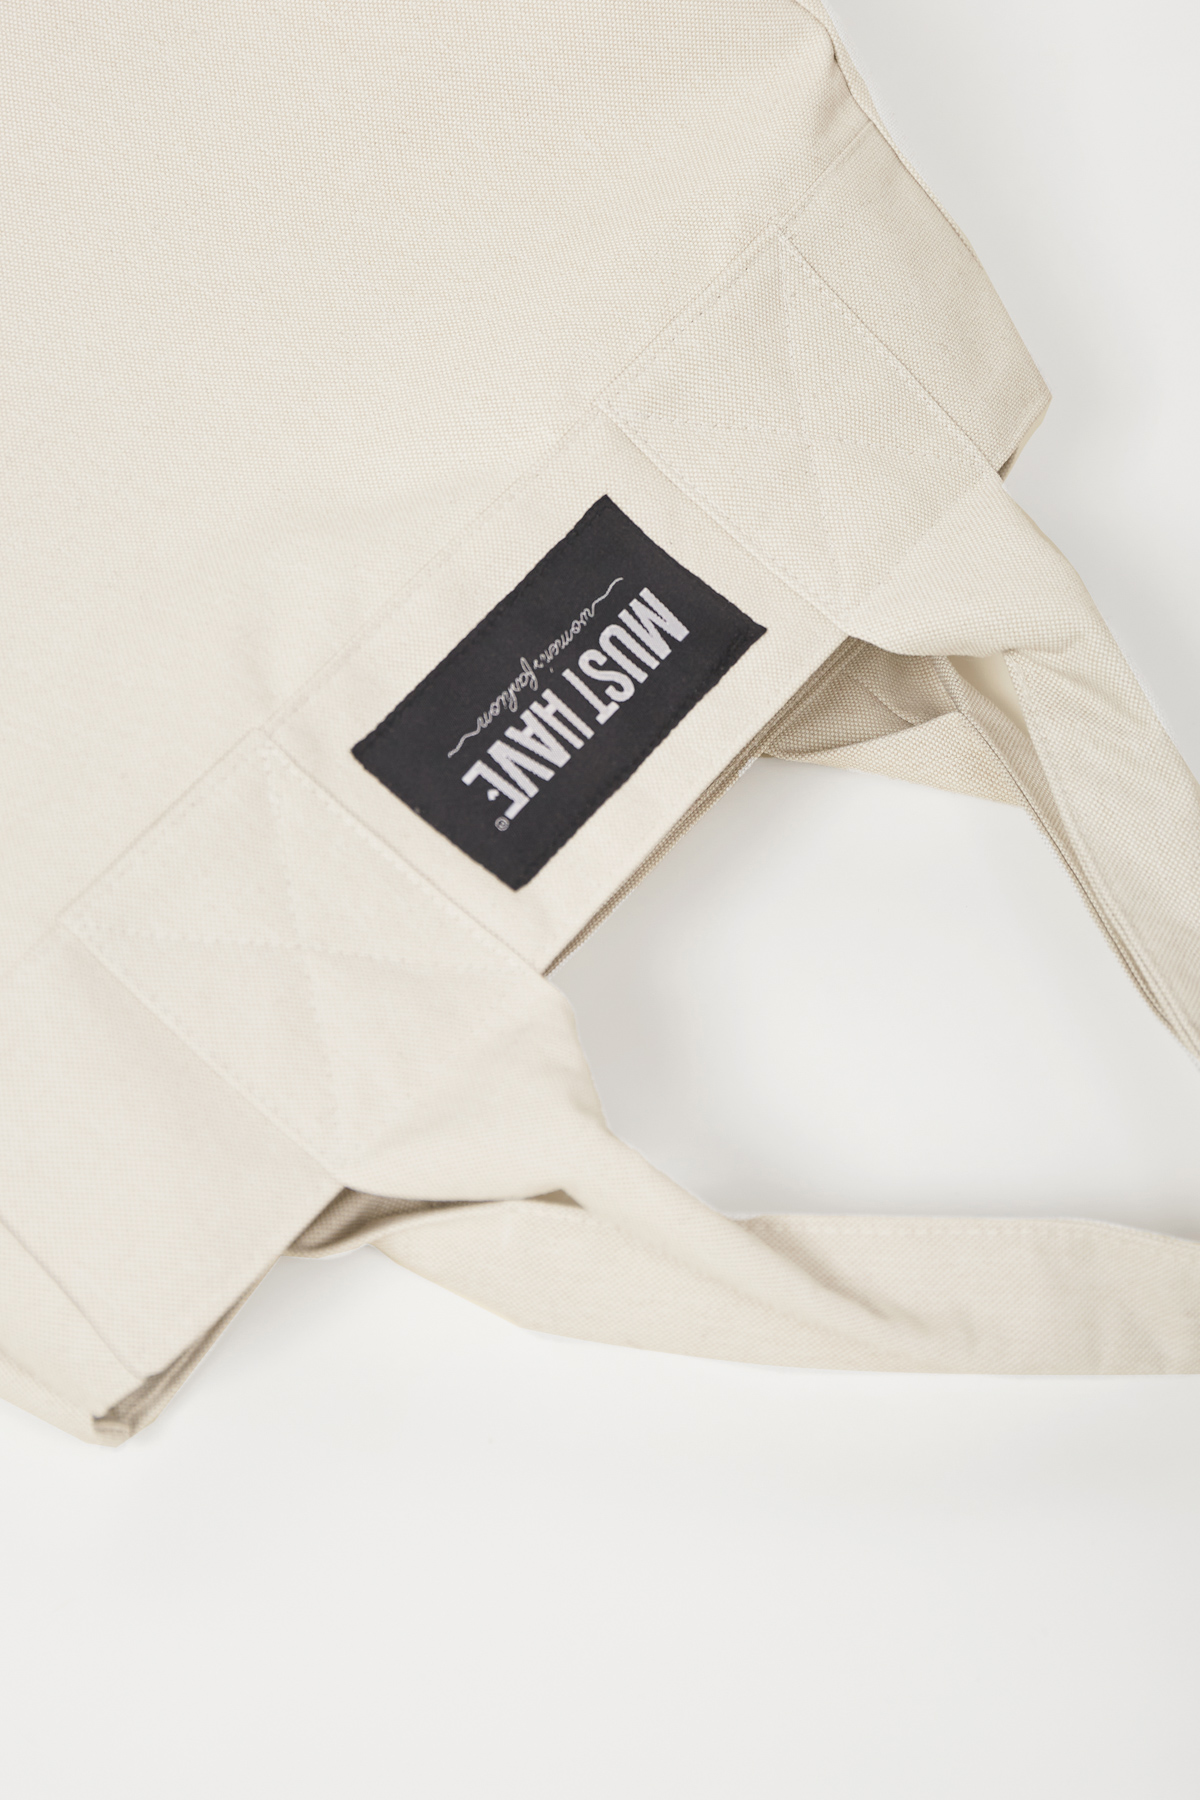 MustHave cotton bag, photo 5